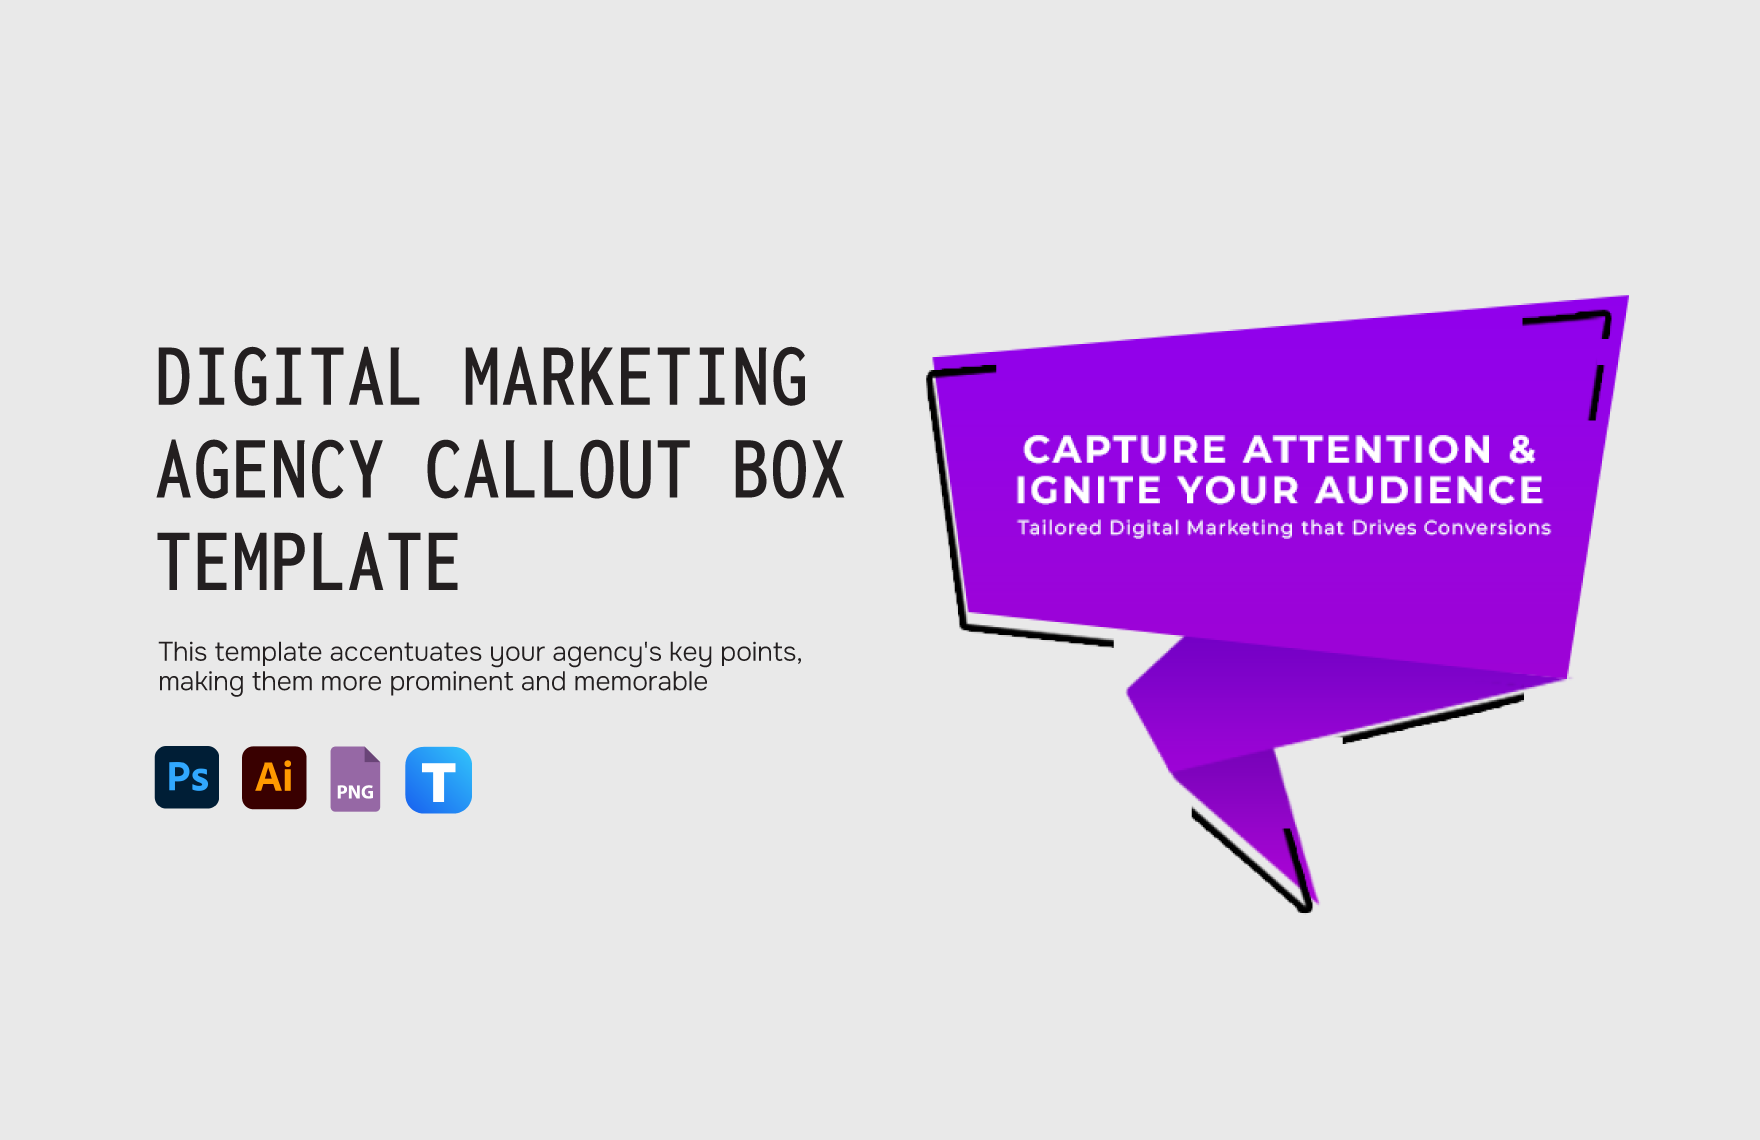 Digital Marketing Agency Callout Box Template in Illustrator, PSD